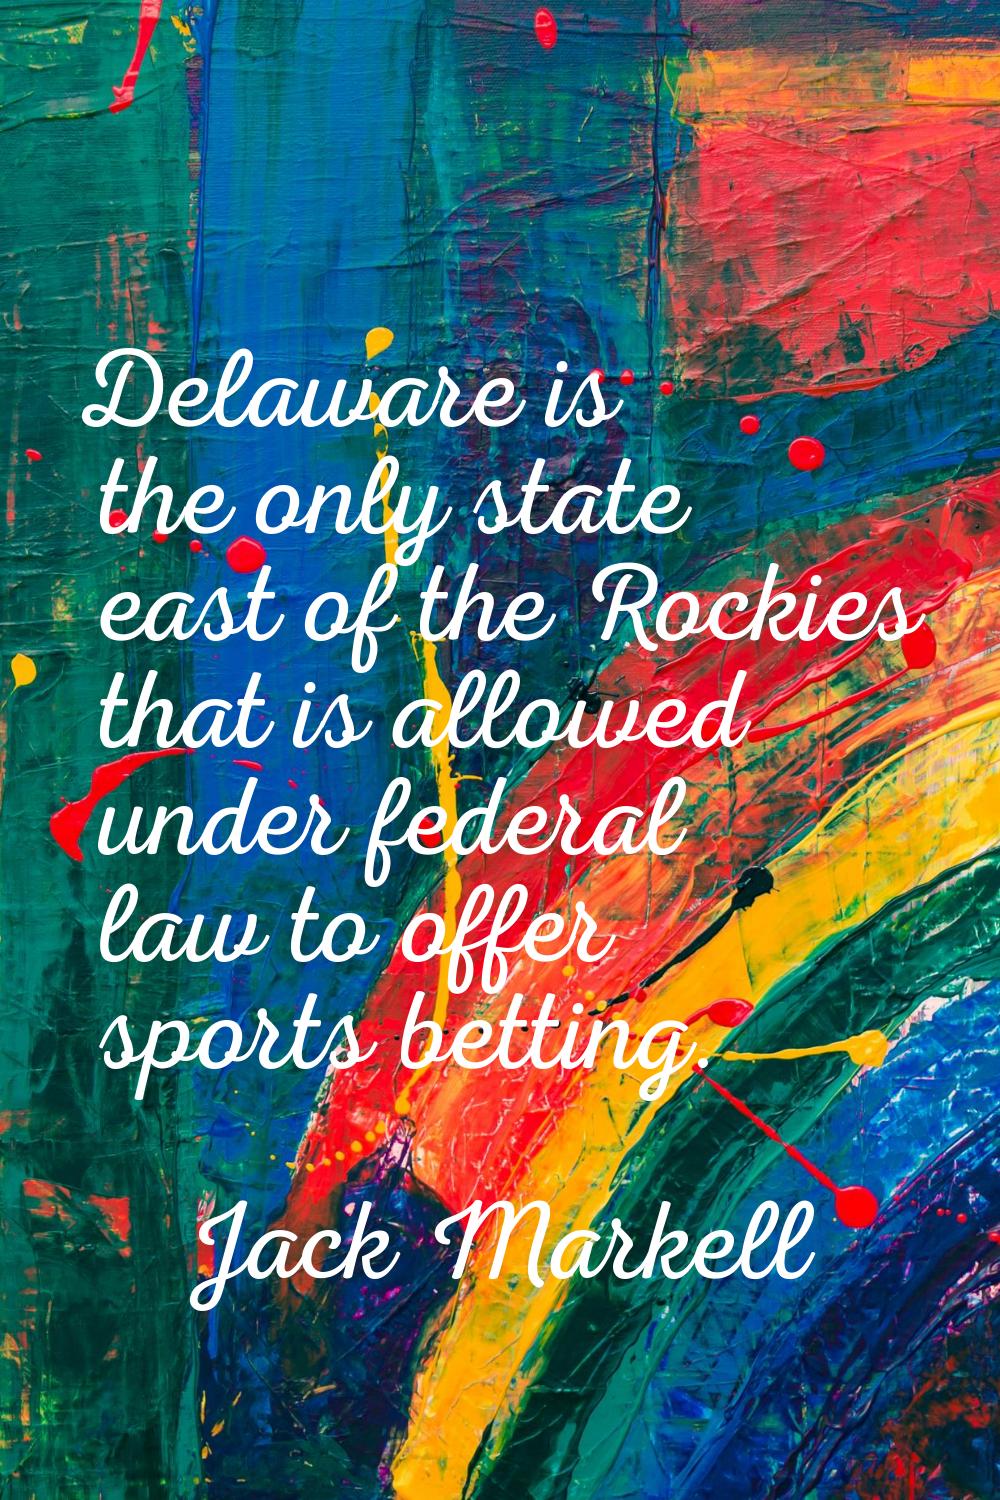 Delaware is the only state east of the Rockies that is allowed under federal law to offer sports be